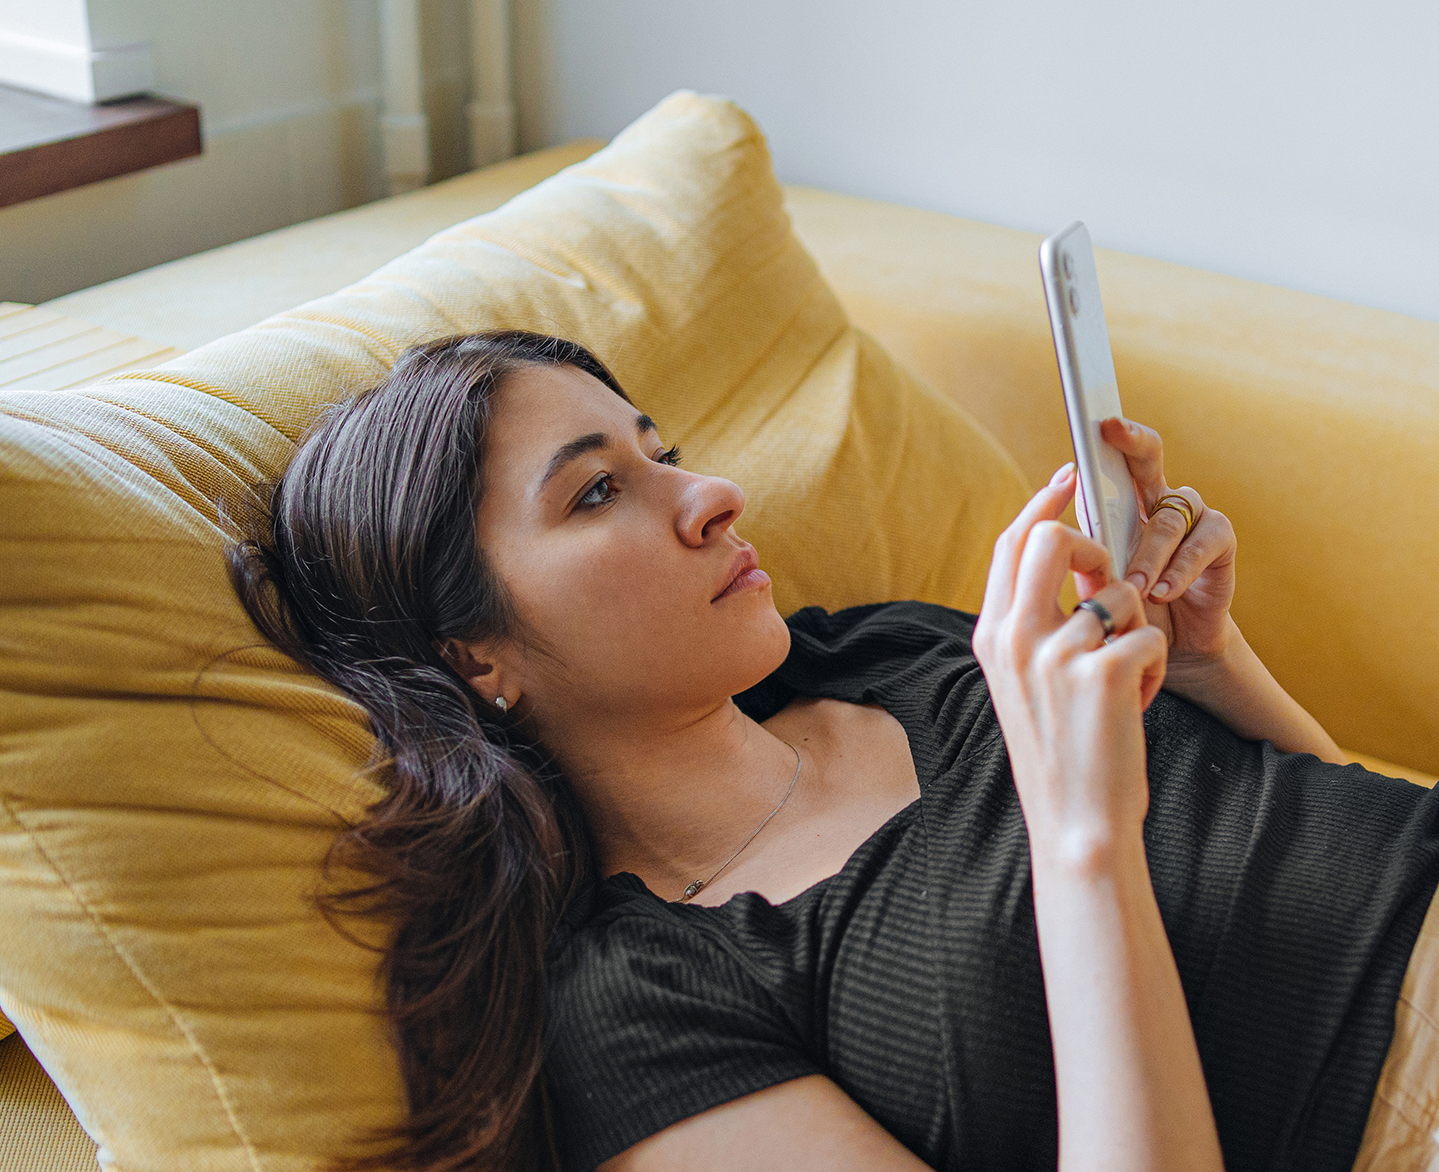 Woman scheduling appointment for UTI treatment online on her mobile phone while lying on couch